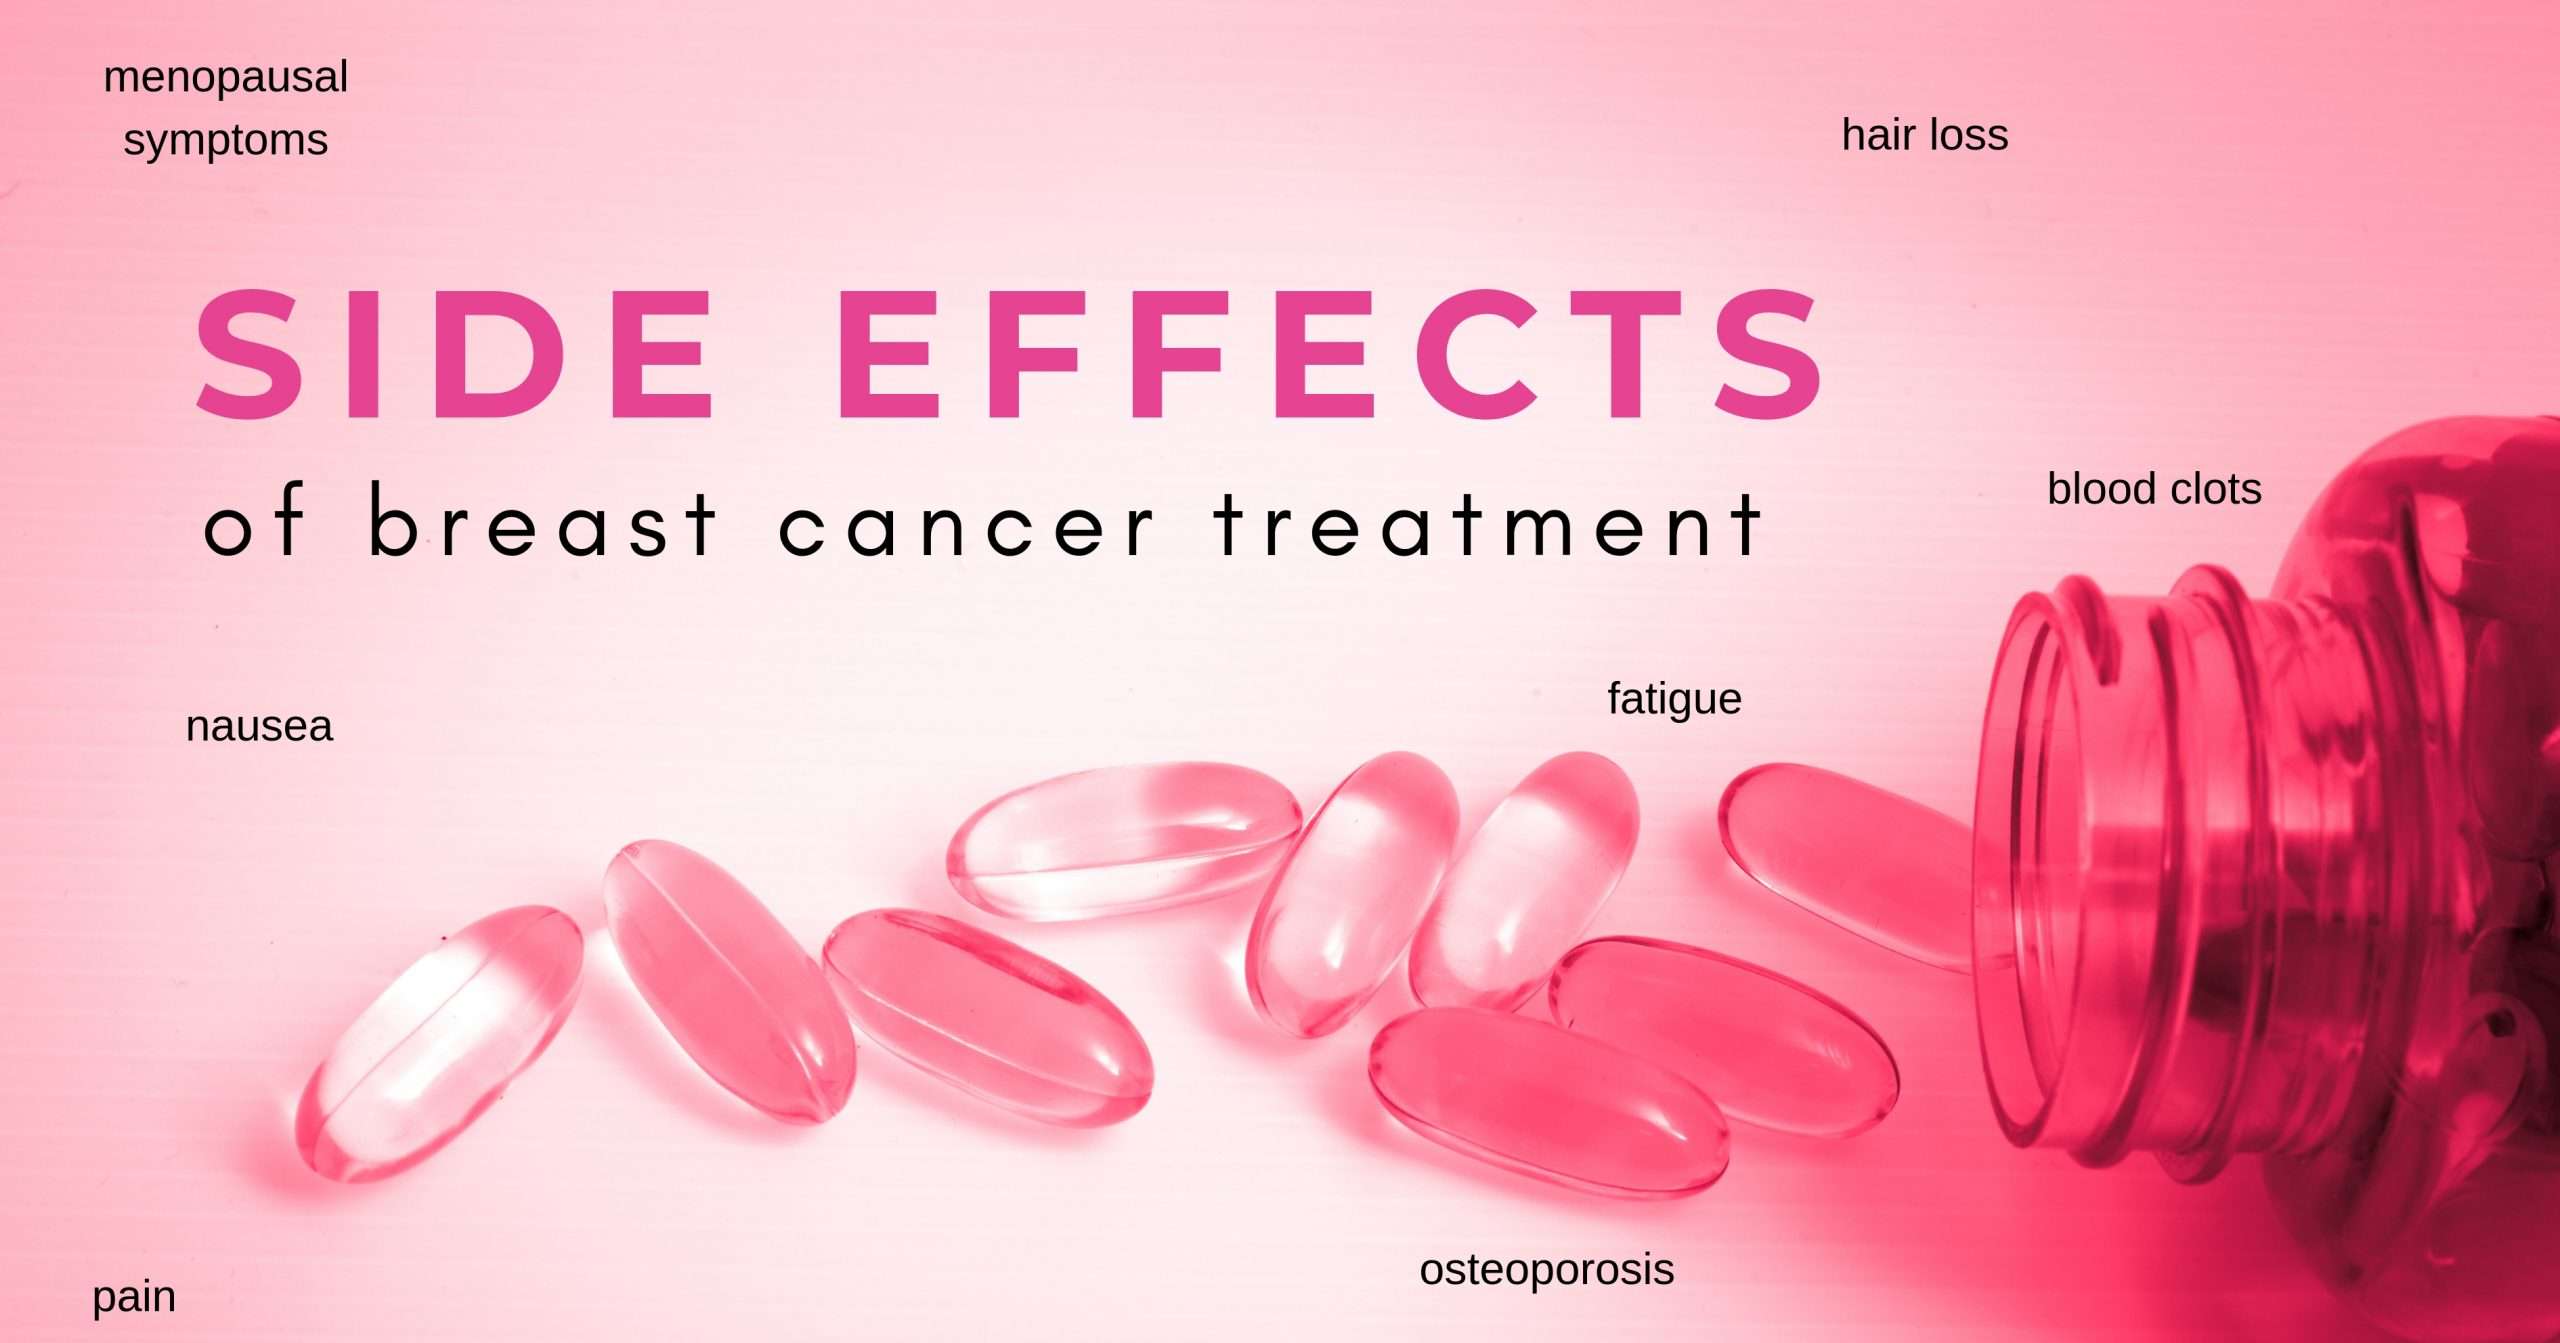 Side effects of breast cancer treatment